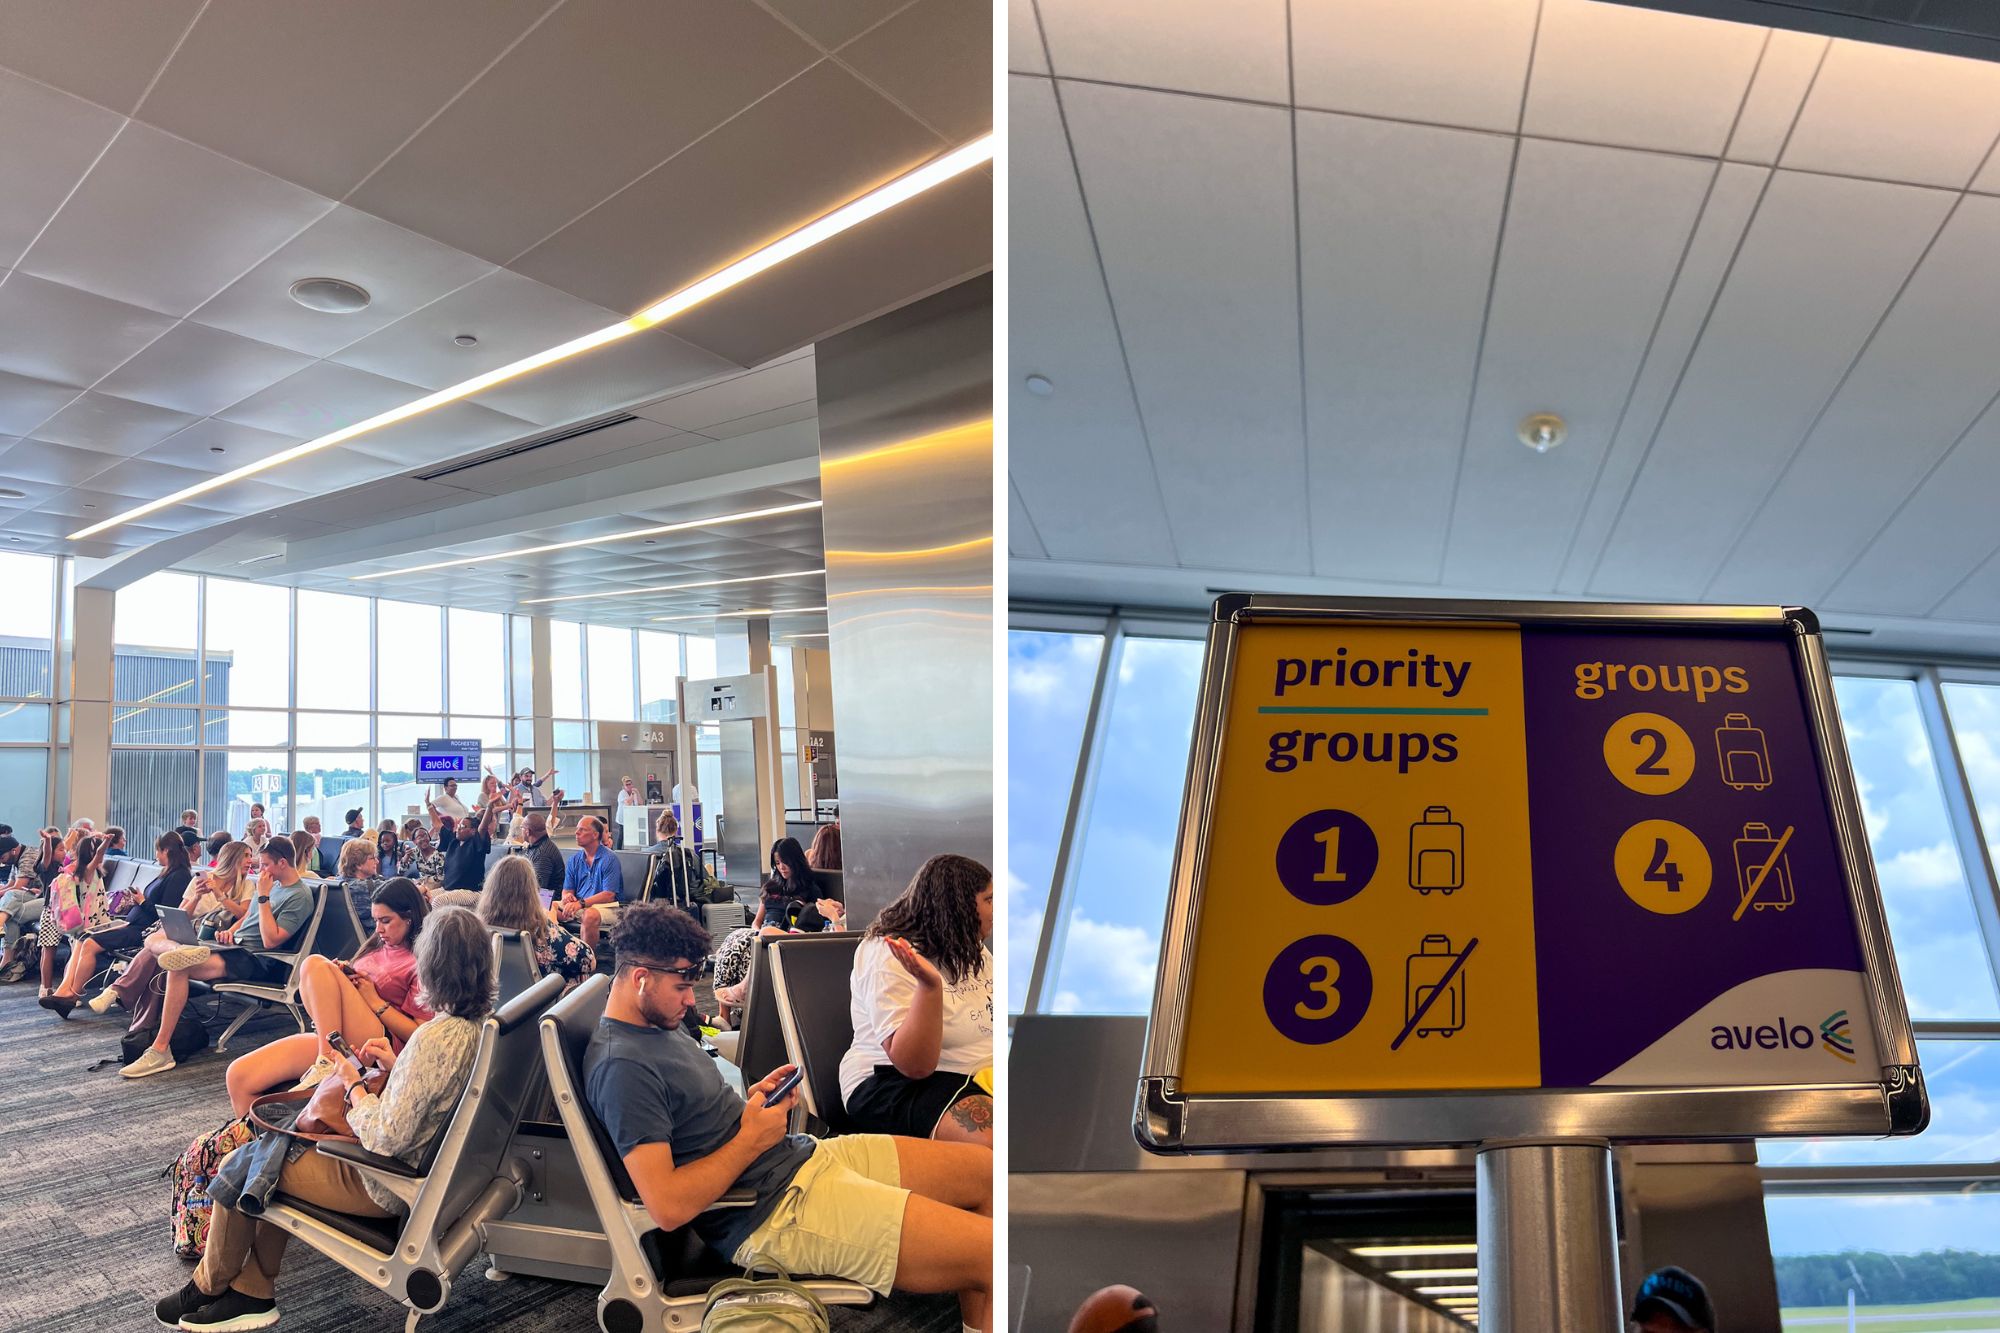 Two images: a crowd of people waiting at the gate and the boarding groups sign